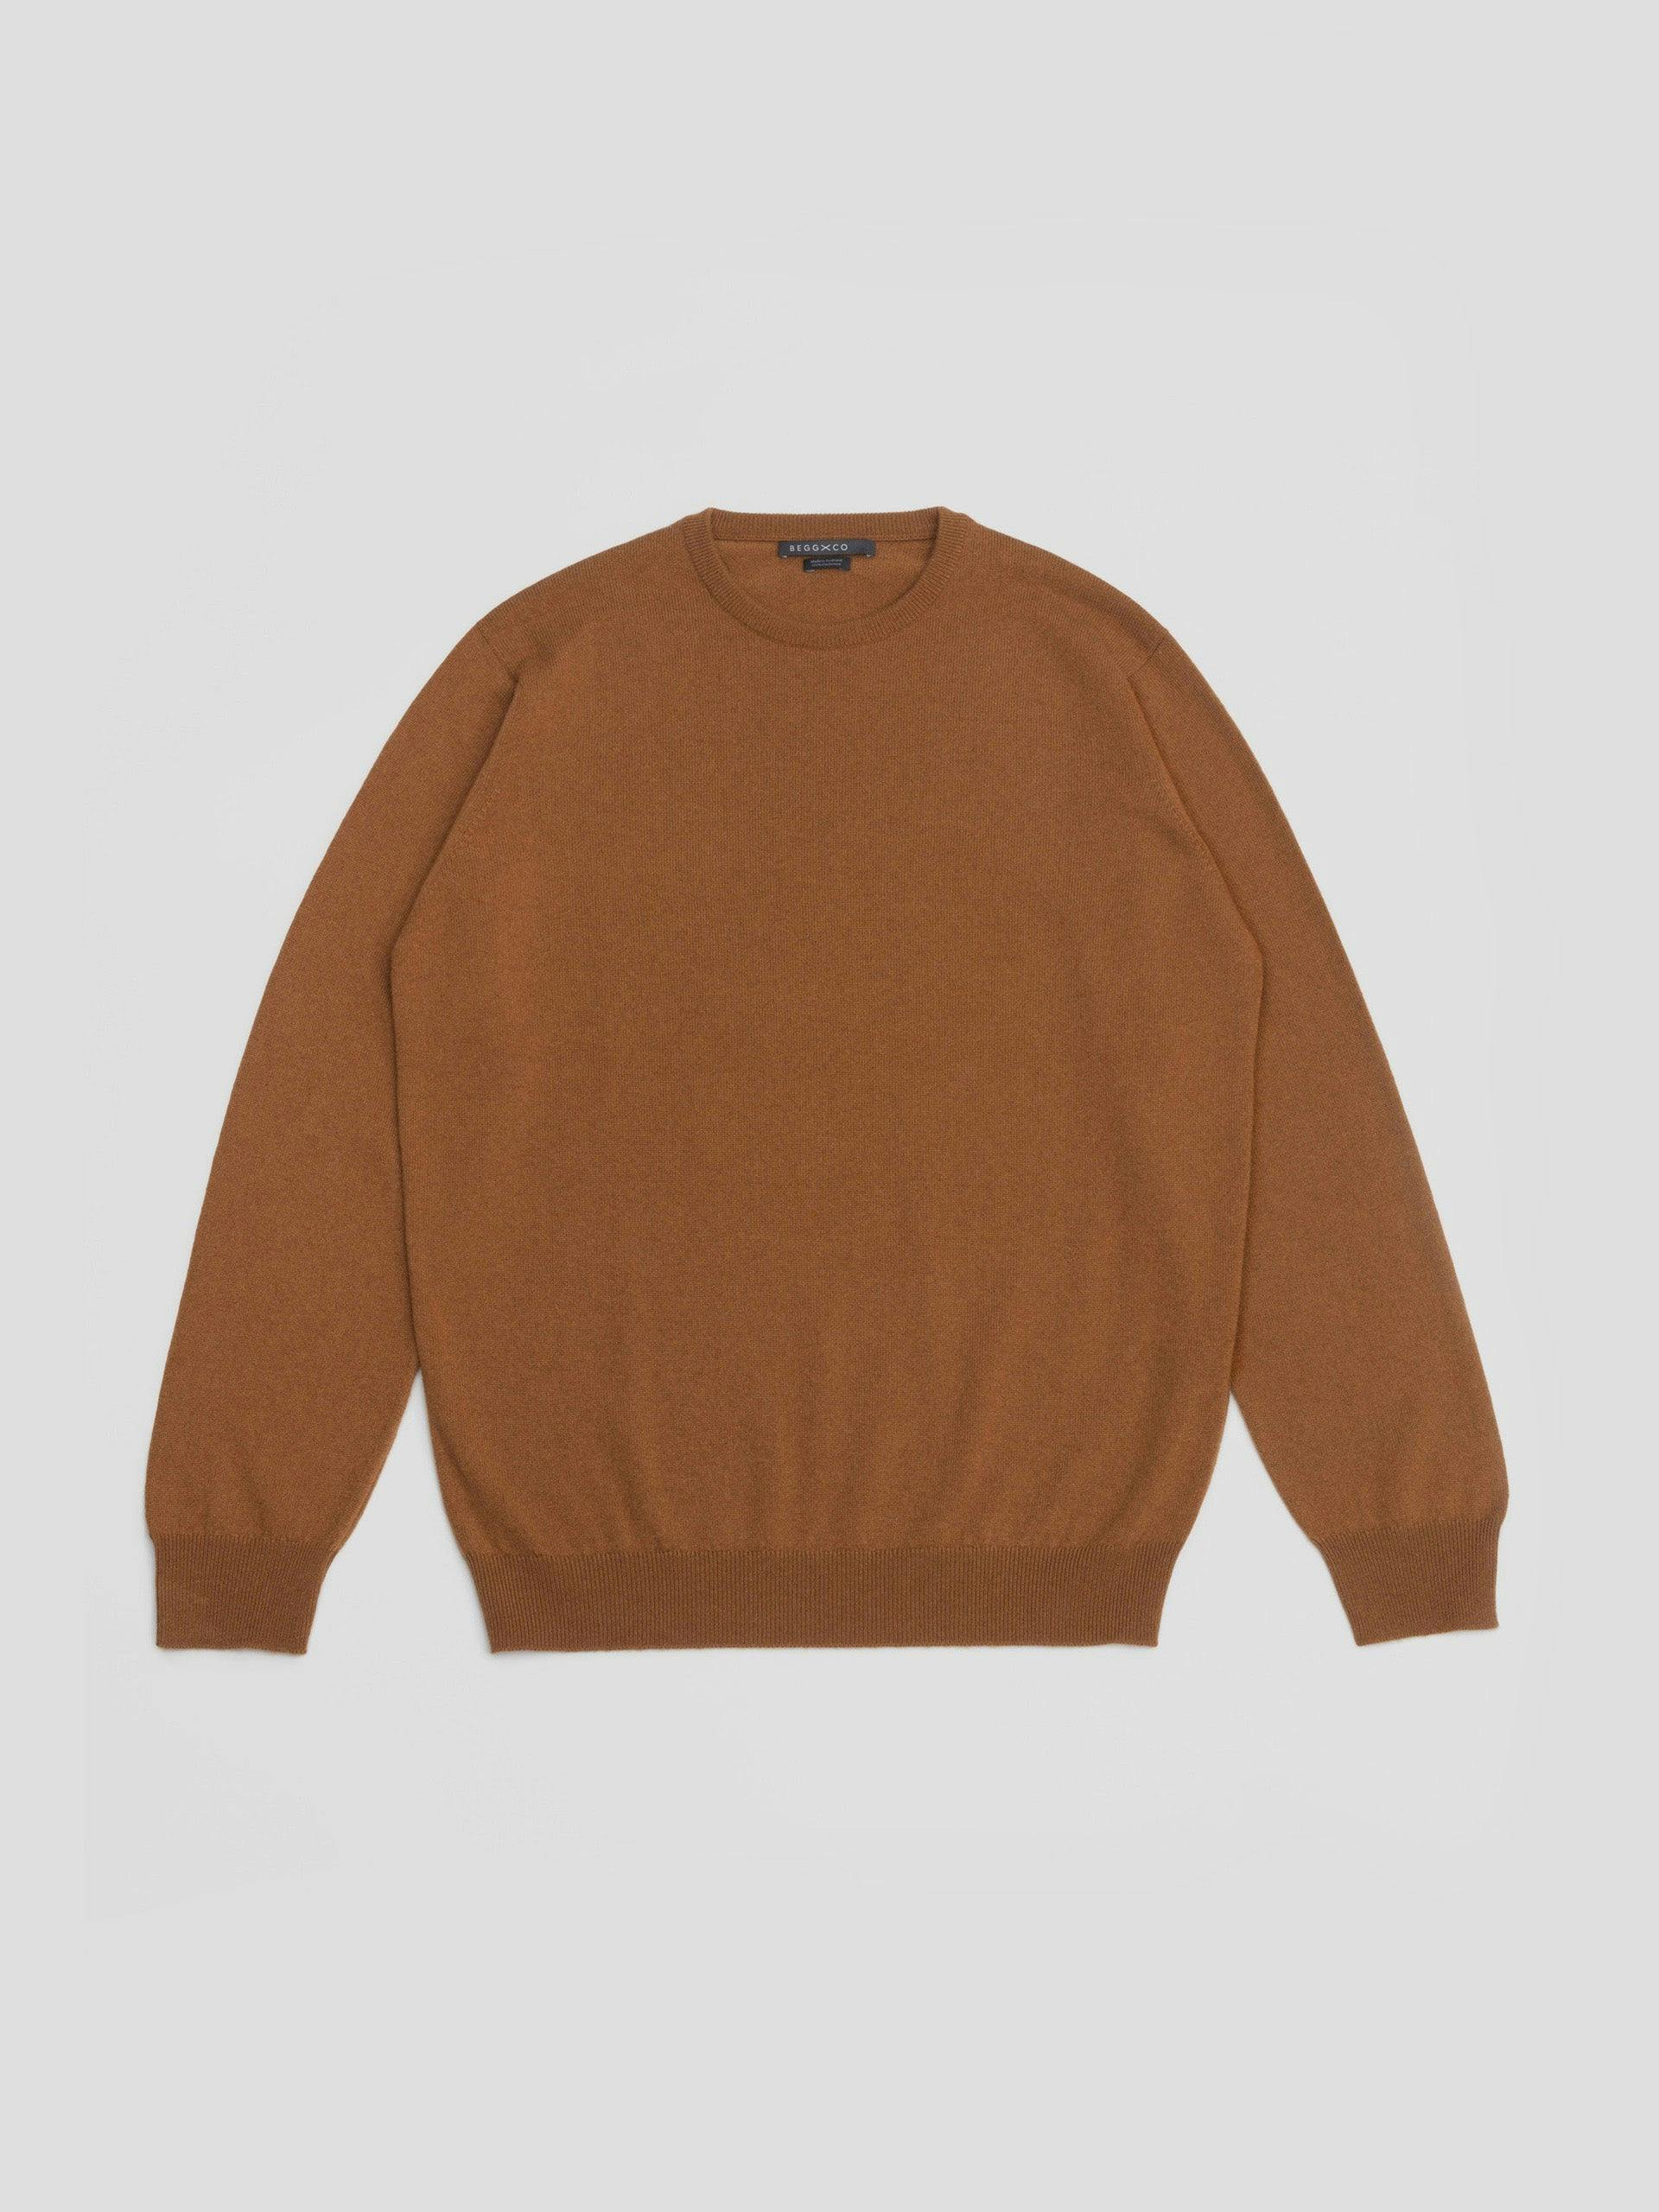 Crew neck knitted cashmere jumper